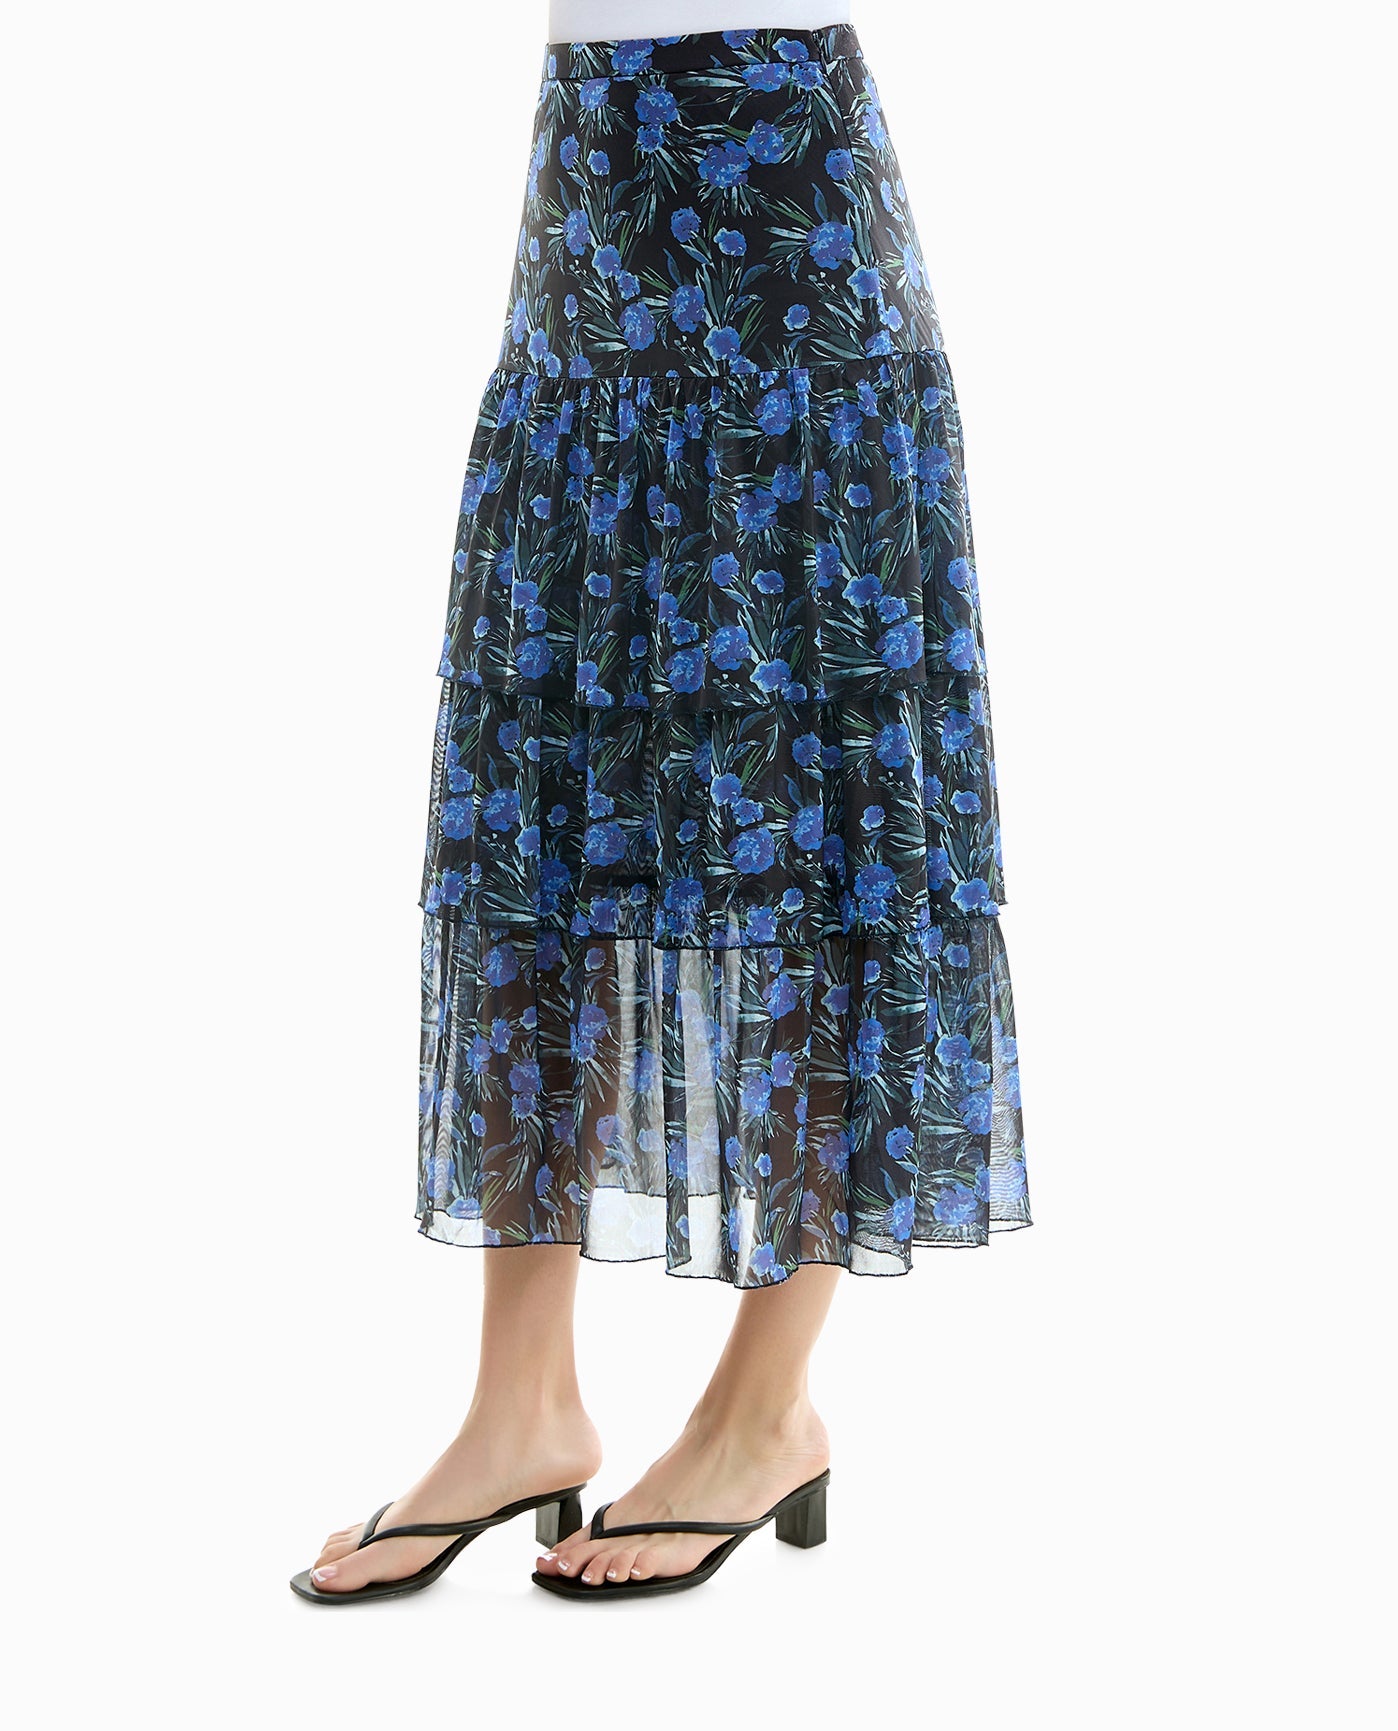 SIDE OF FLORA KNIT MESH LONG TIERED SKIRT | Navy Print